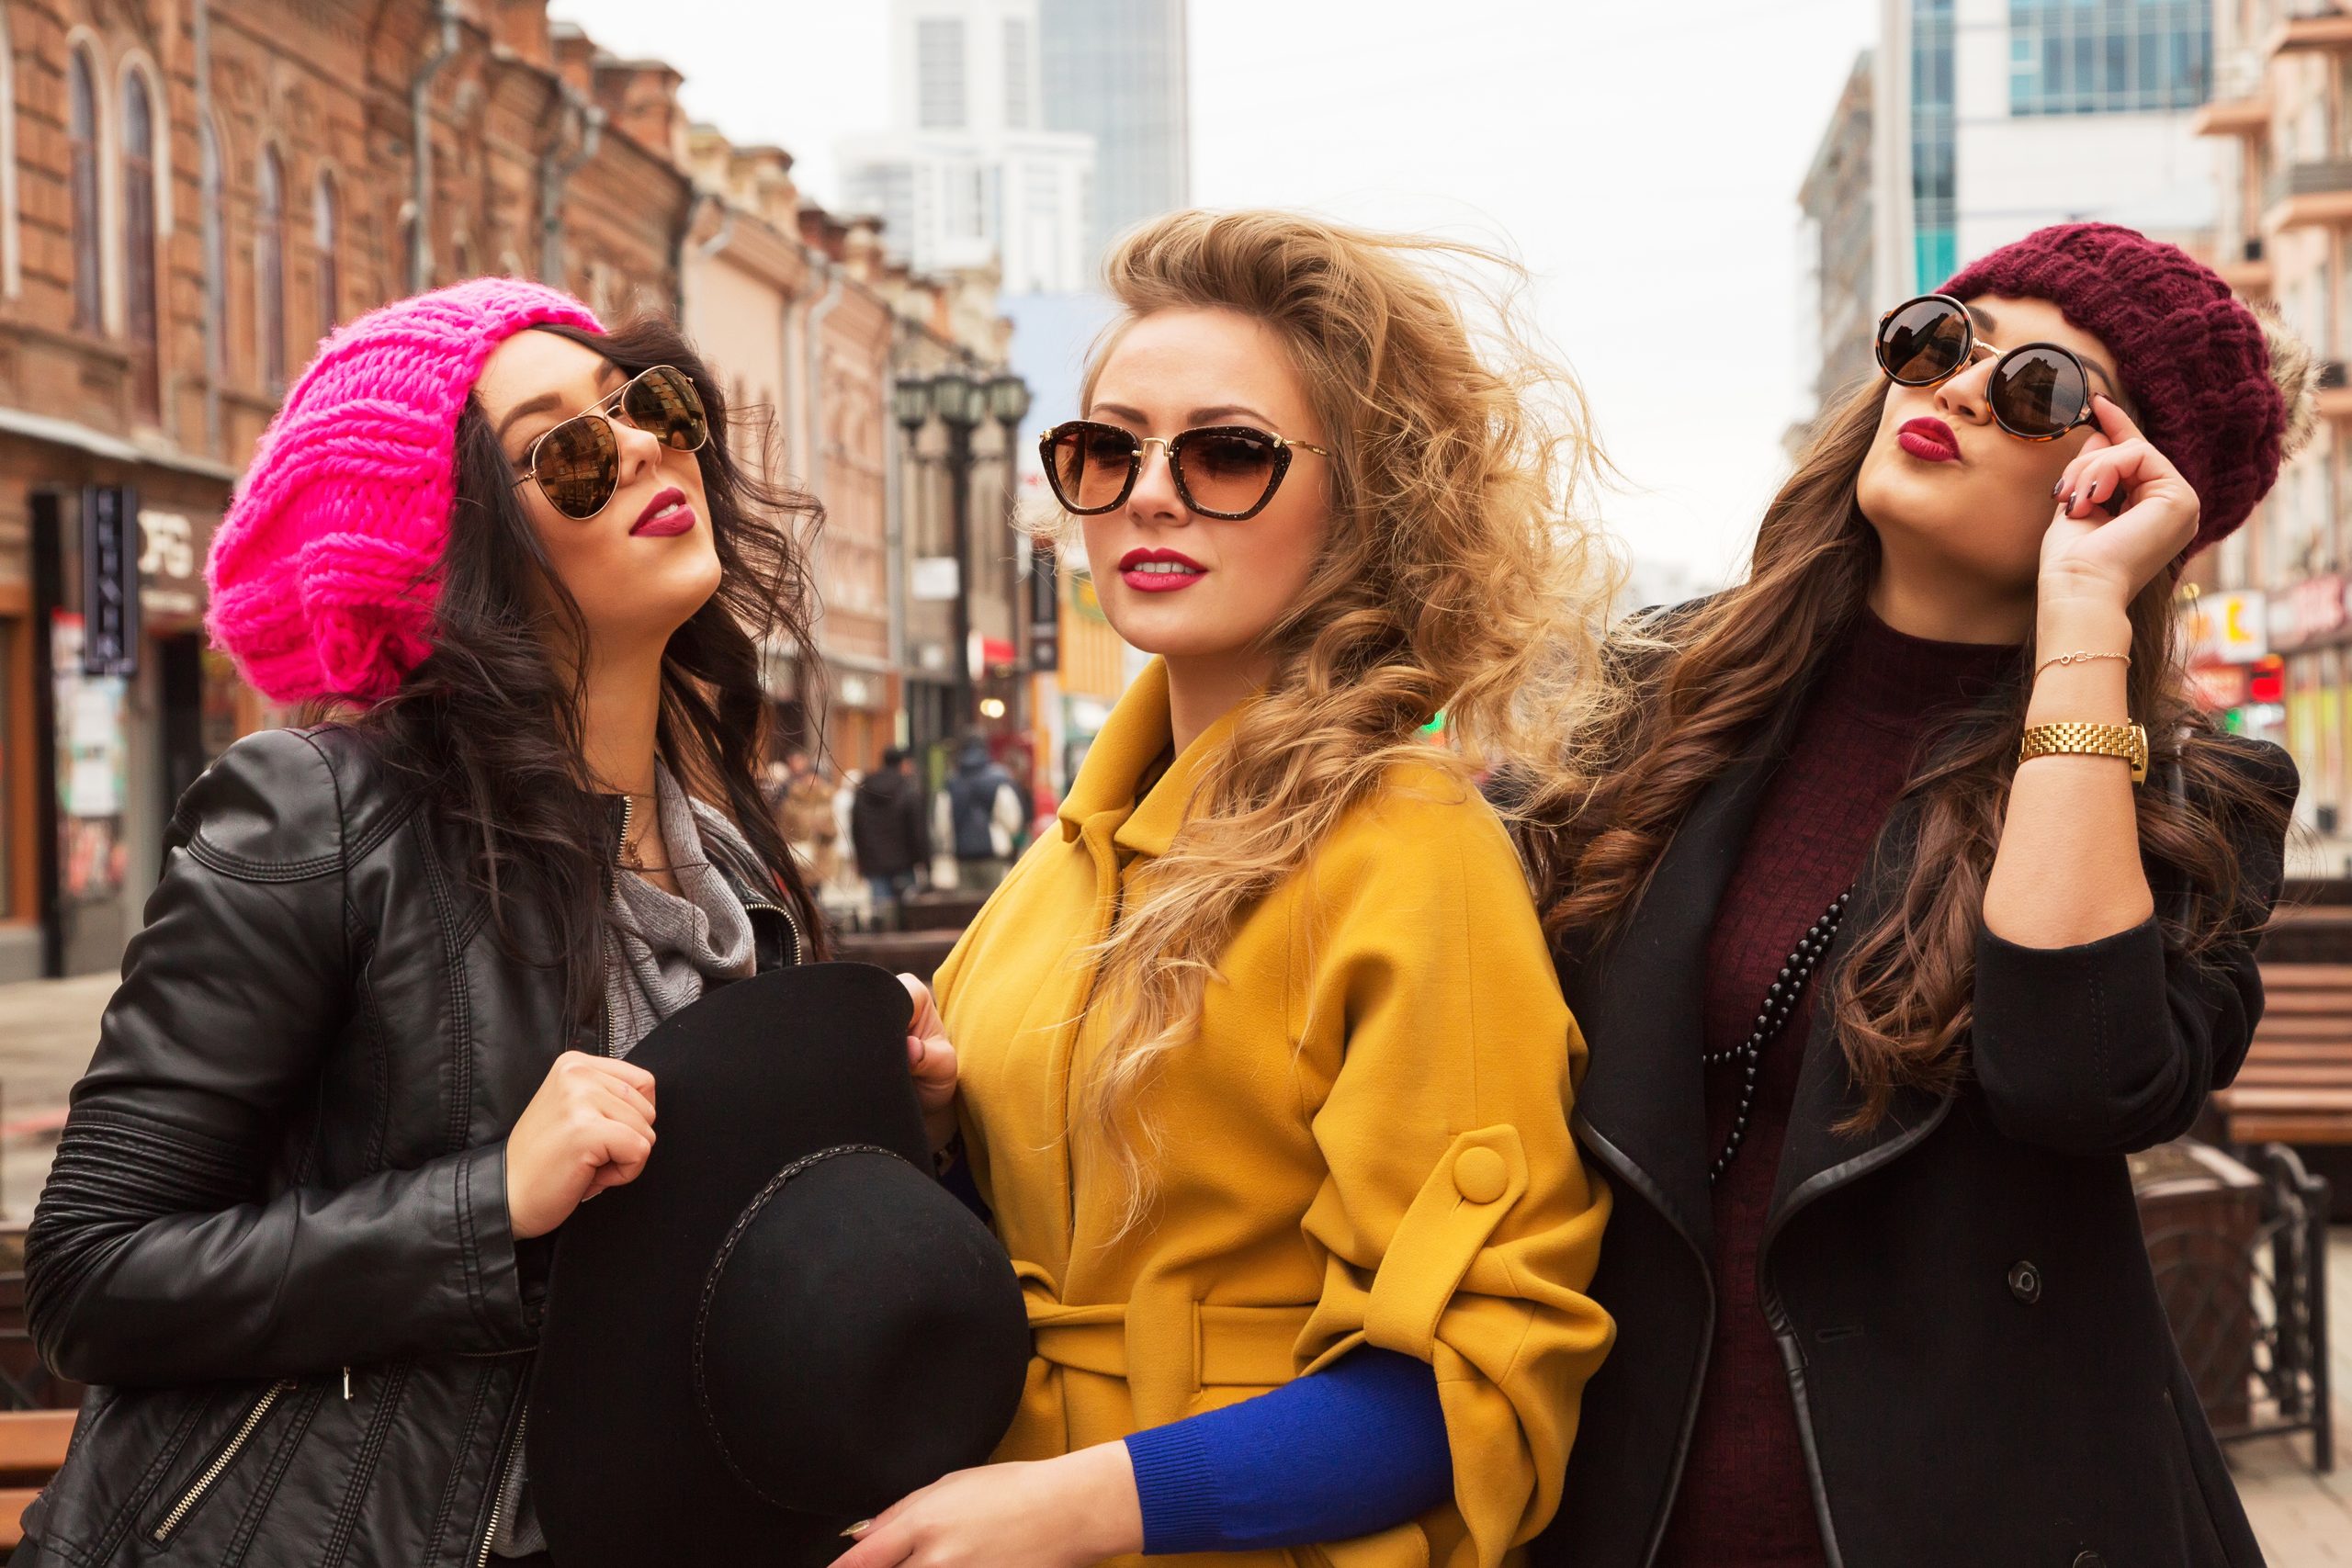 Outdoors fashion portrait of three young pretty smiling girls friends walking at the city. Shopping. Posing at the street. Wearing stylish outerwear, hats and sunglasses. Bright make up. Positive